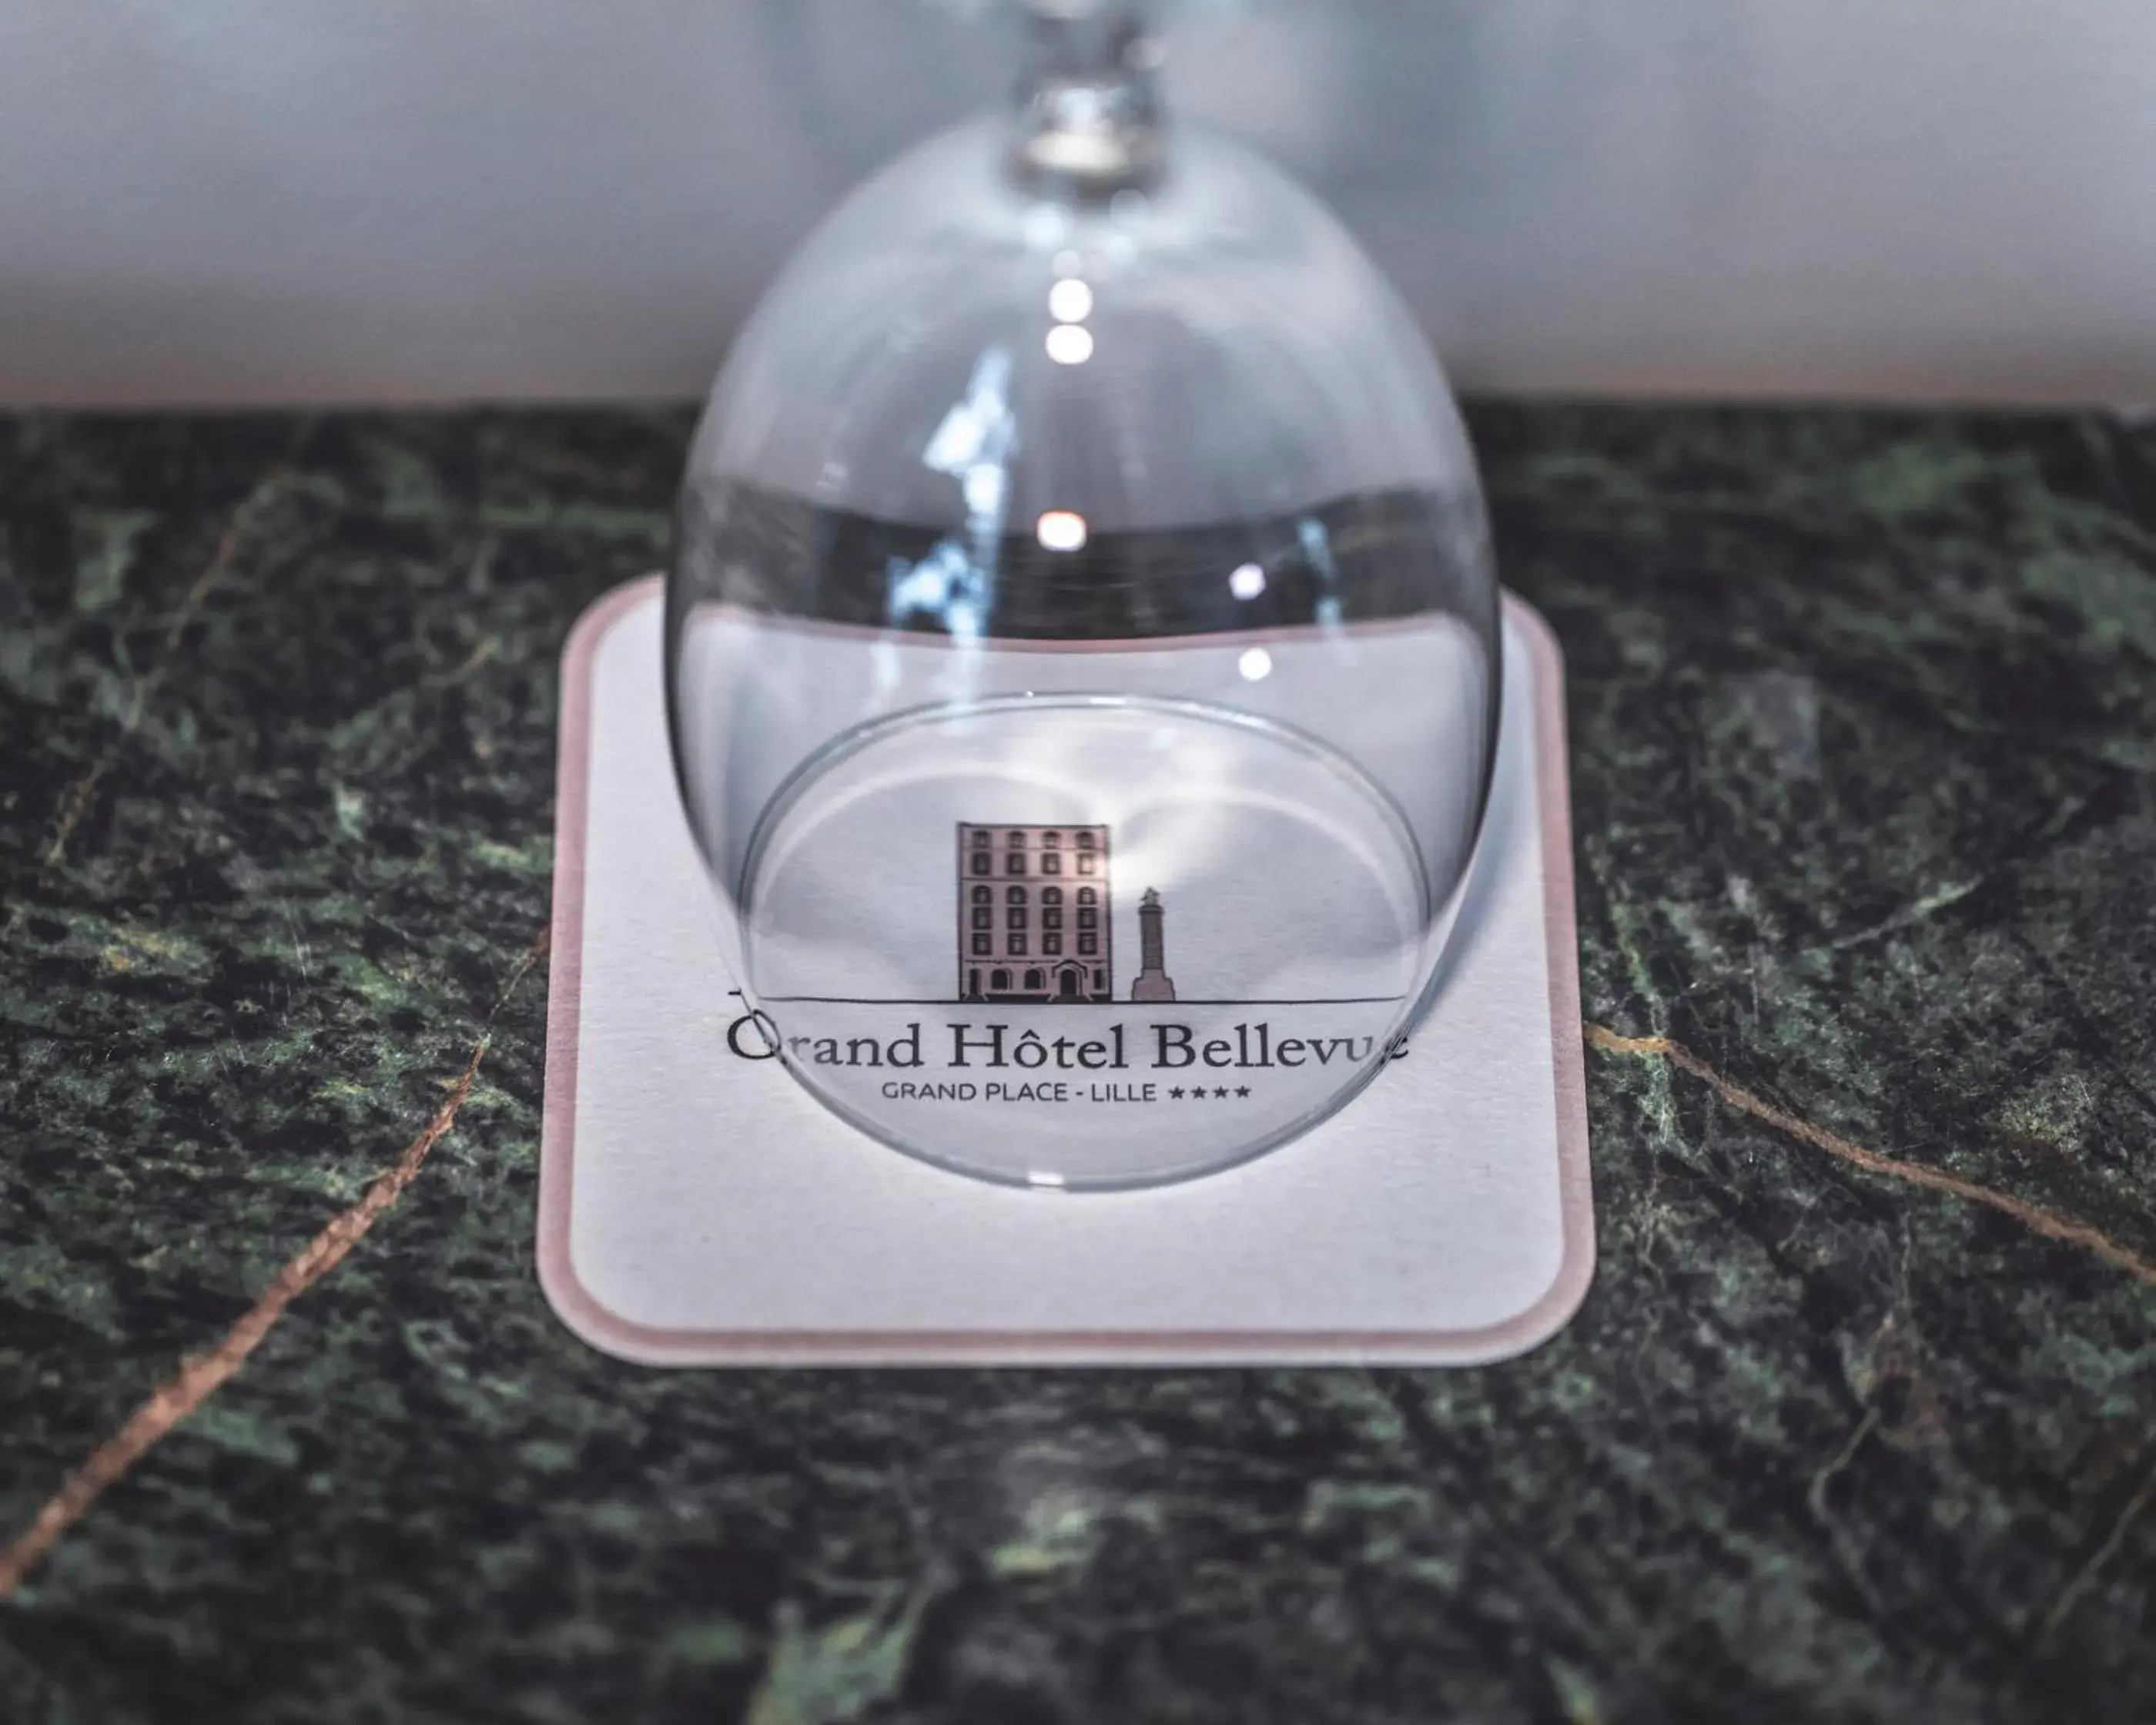 Property logo or sign in Grand Hotel Bellevue - Grand Place